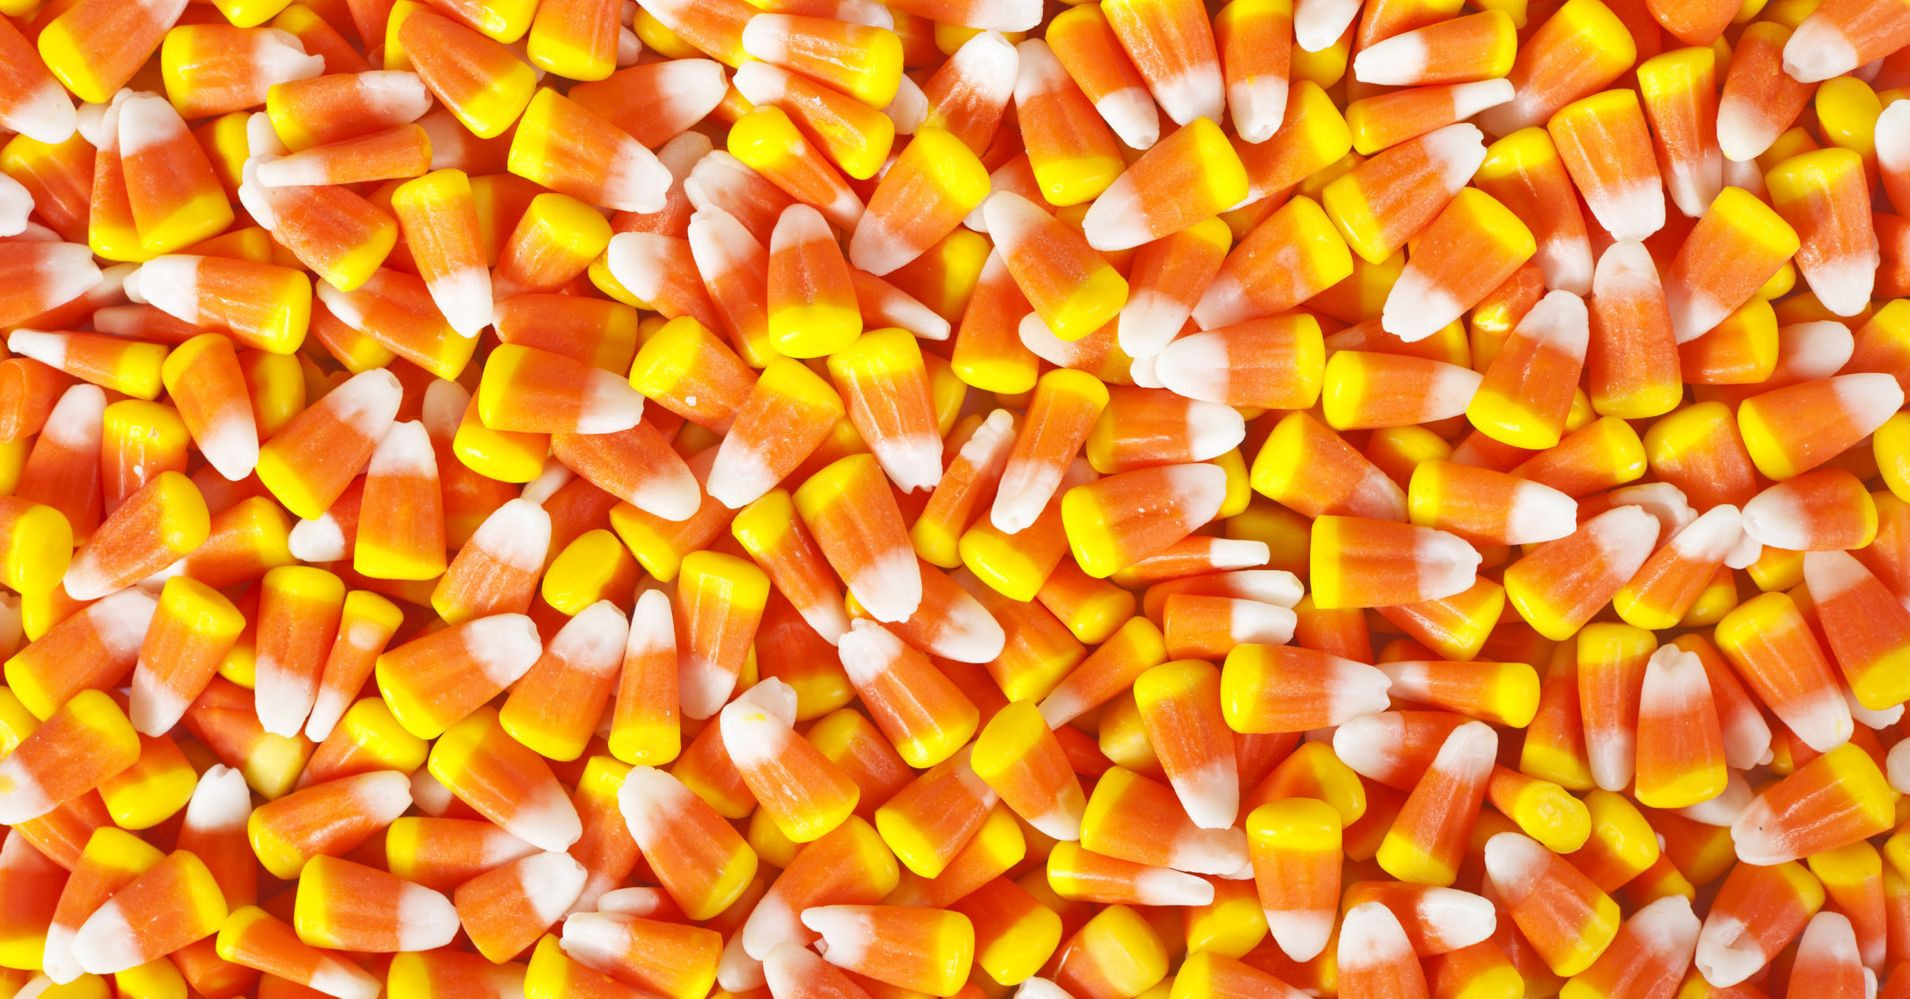 Gw2 Candy Corn Gobbler
 The Great Candy Corn Debate Rages Twitter